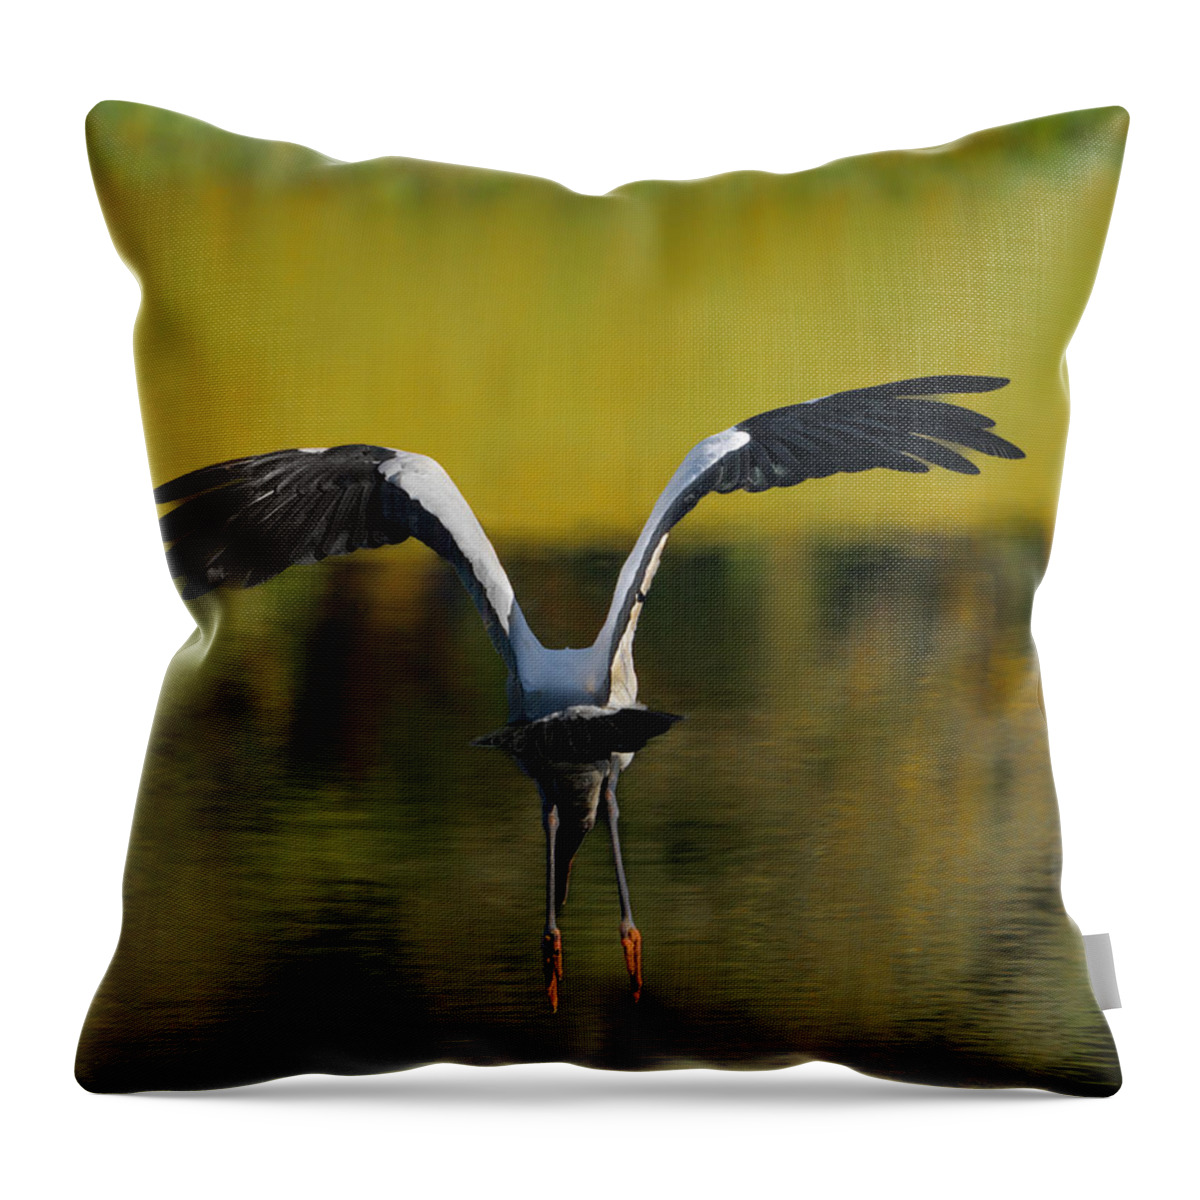 Birds Throw Pillow featuring the photograph Flying Wood Stork by Larry Marshall